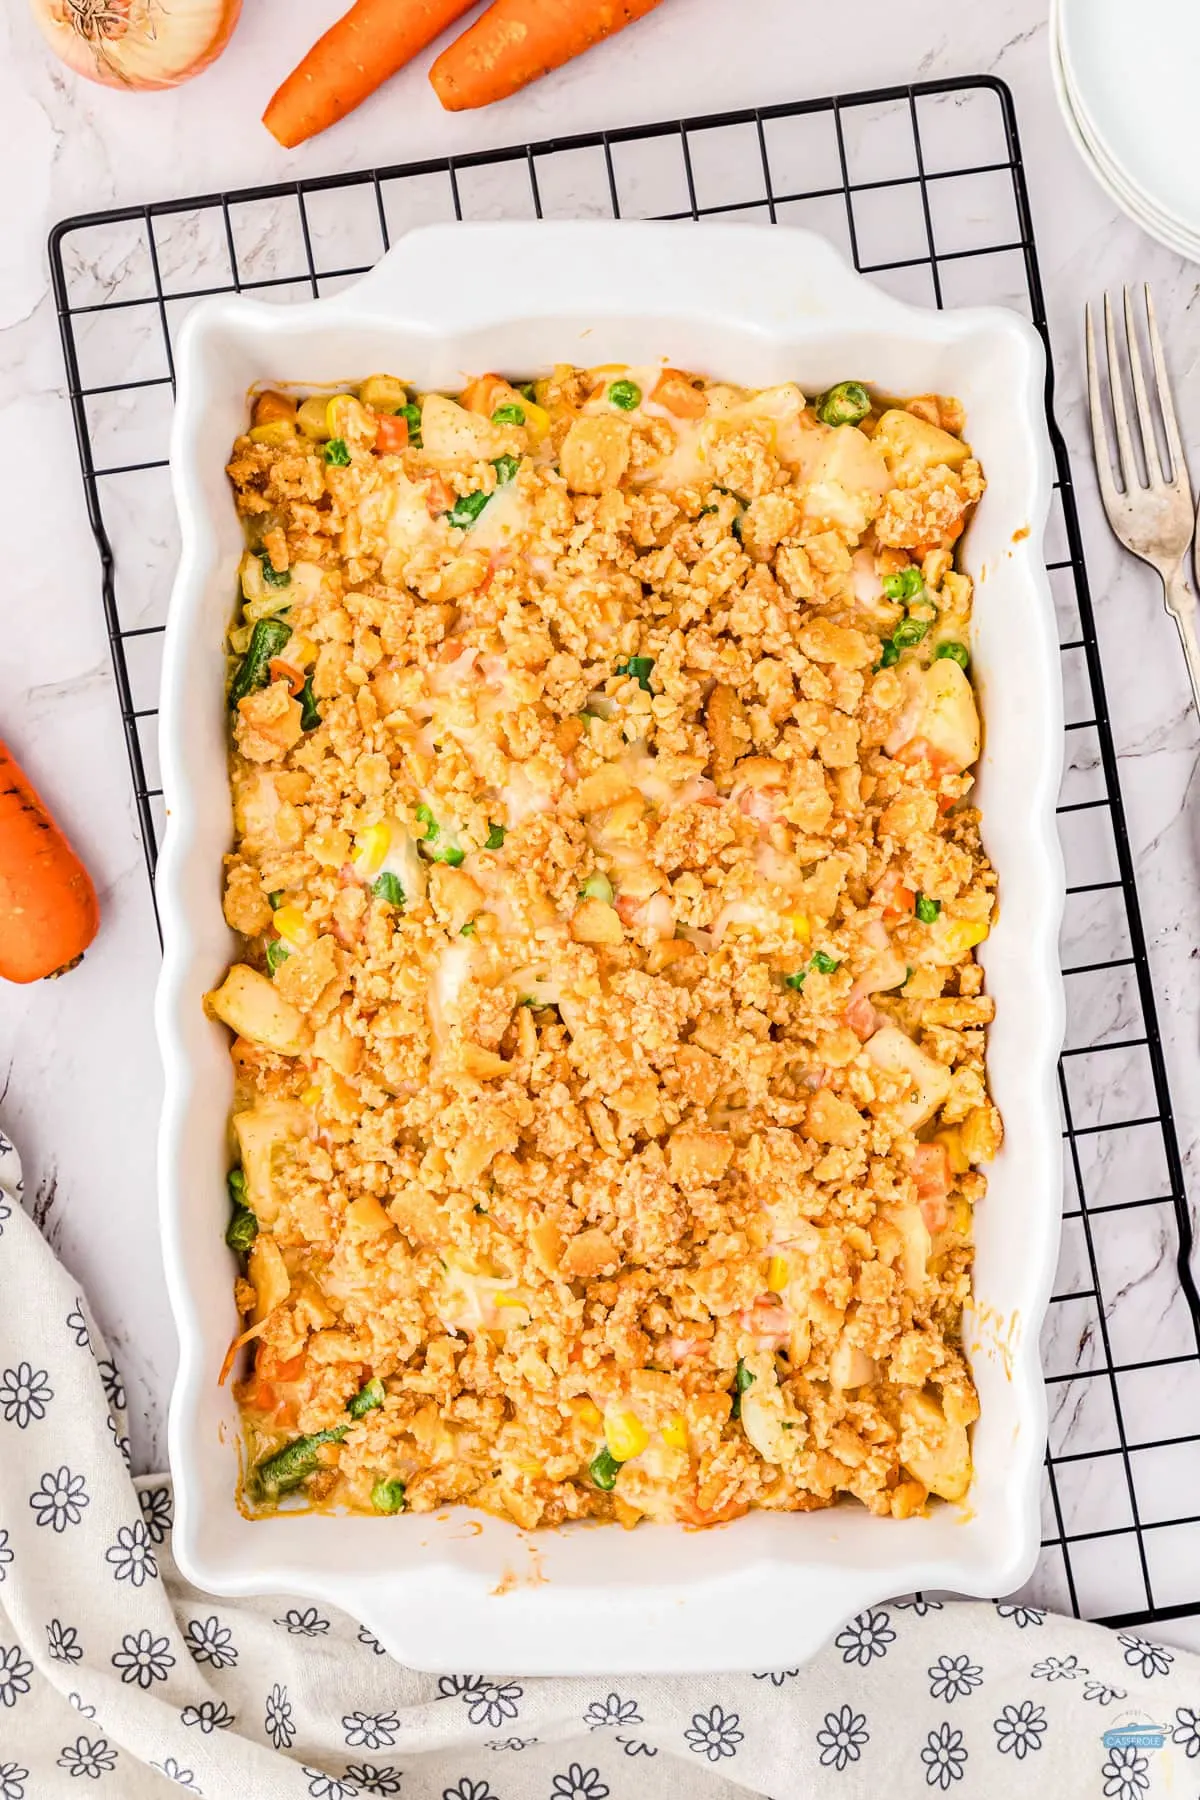 this veggie casserole is one of my favorite vintage recipes